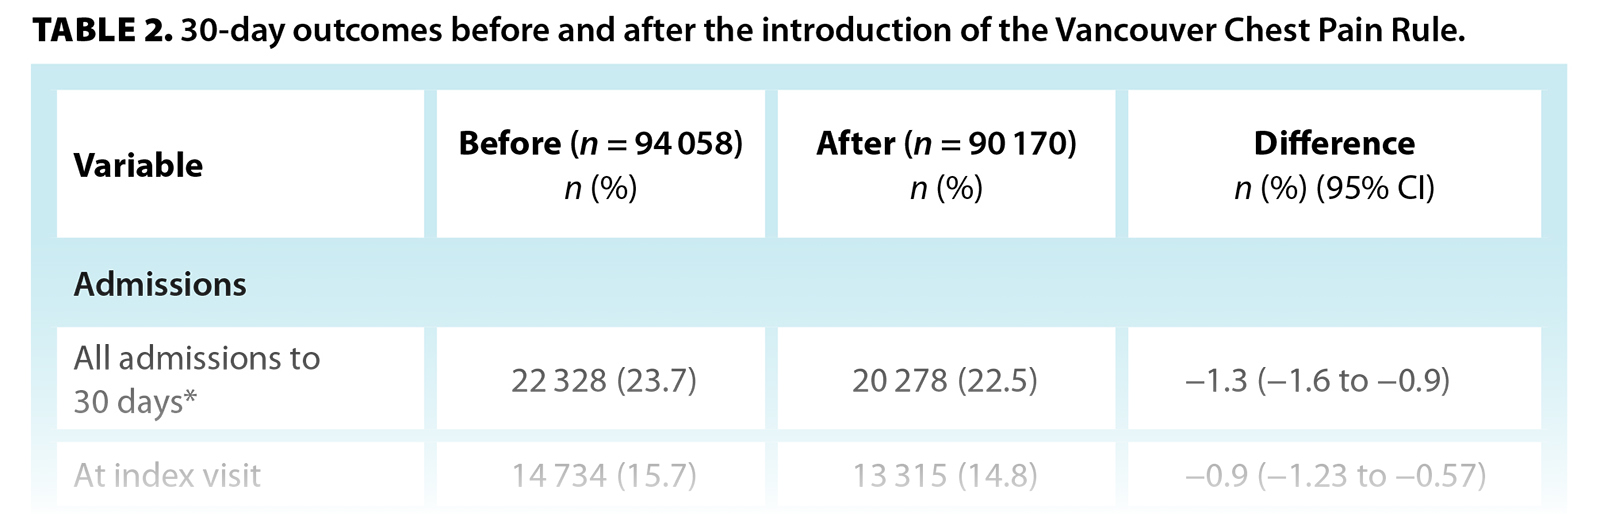 TABLE 2. 30-day outcomes before and after the introduction of the Vancouver Chest Pain Rule.